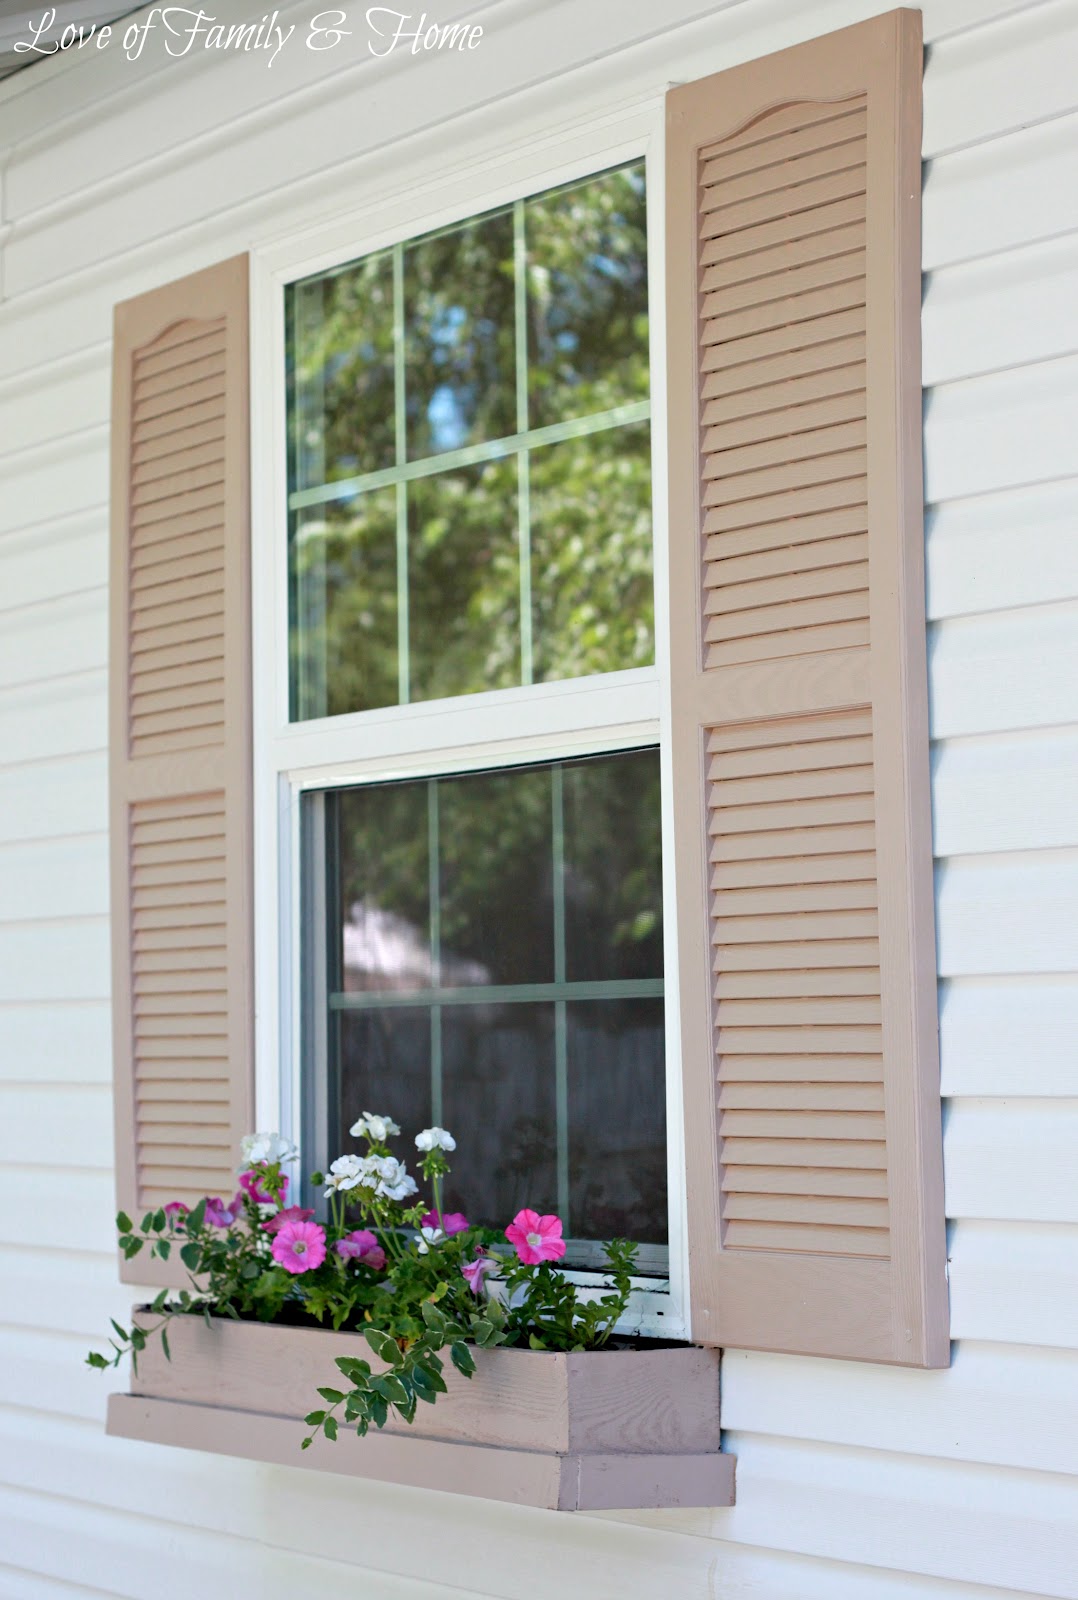 Easy & Inexpensive DIY Window Boxes... - Love of Family & Home